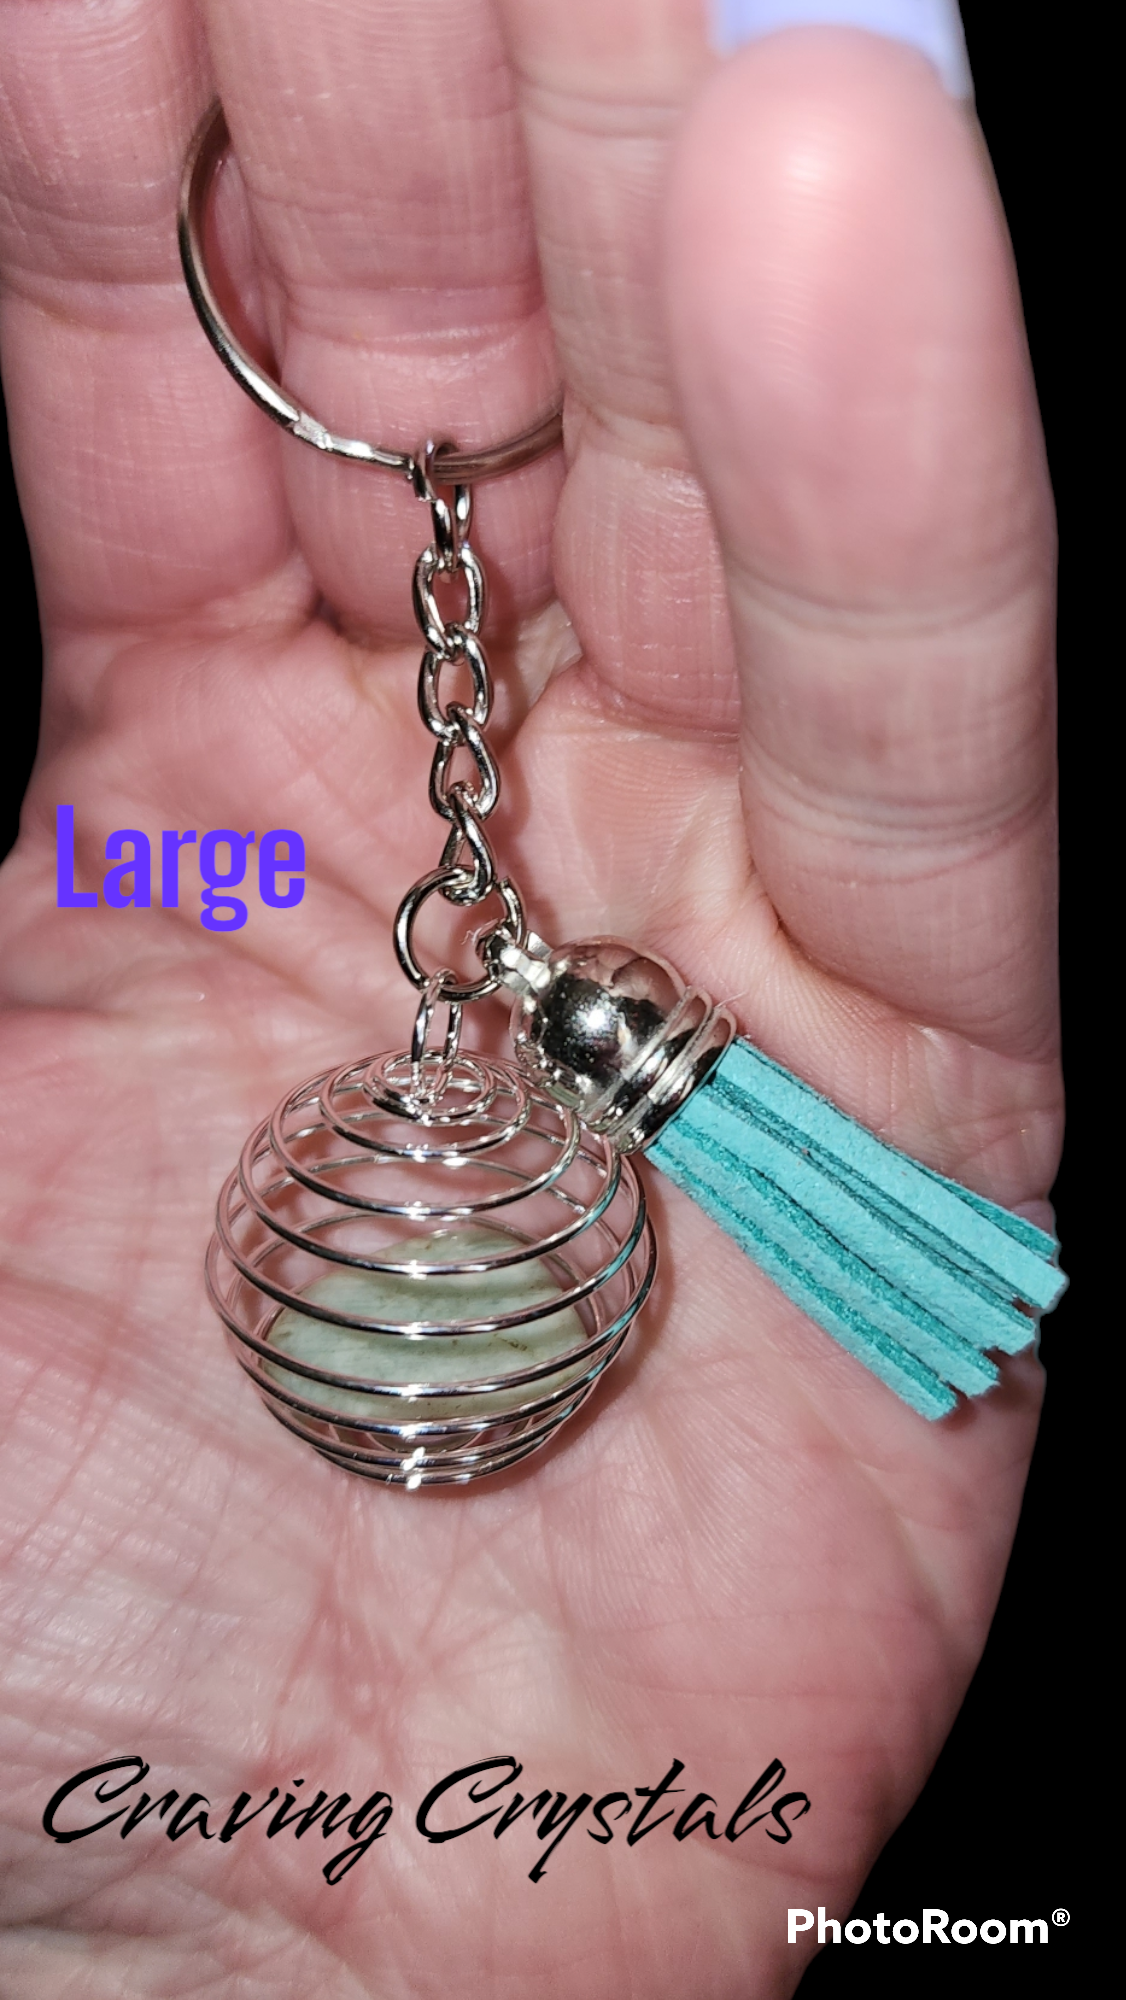 Handmade Crystal Keychains w/ Expandable Cage and Tassels - Reiki Charged Keychains